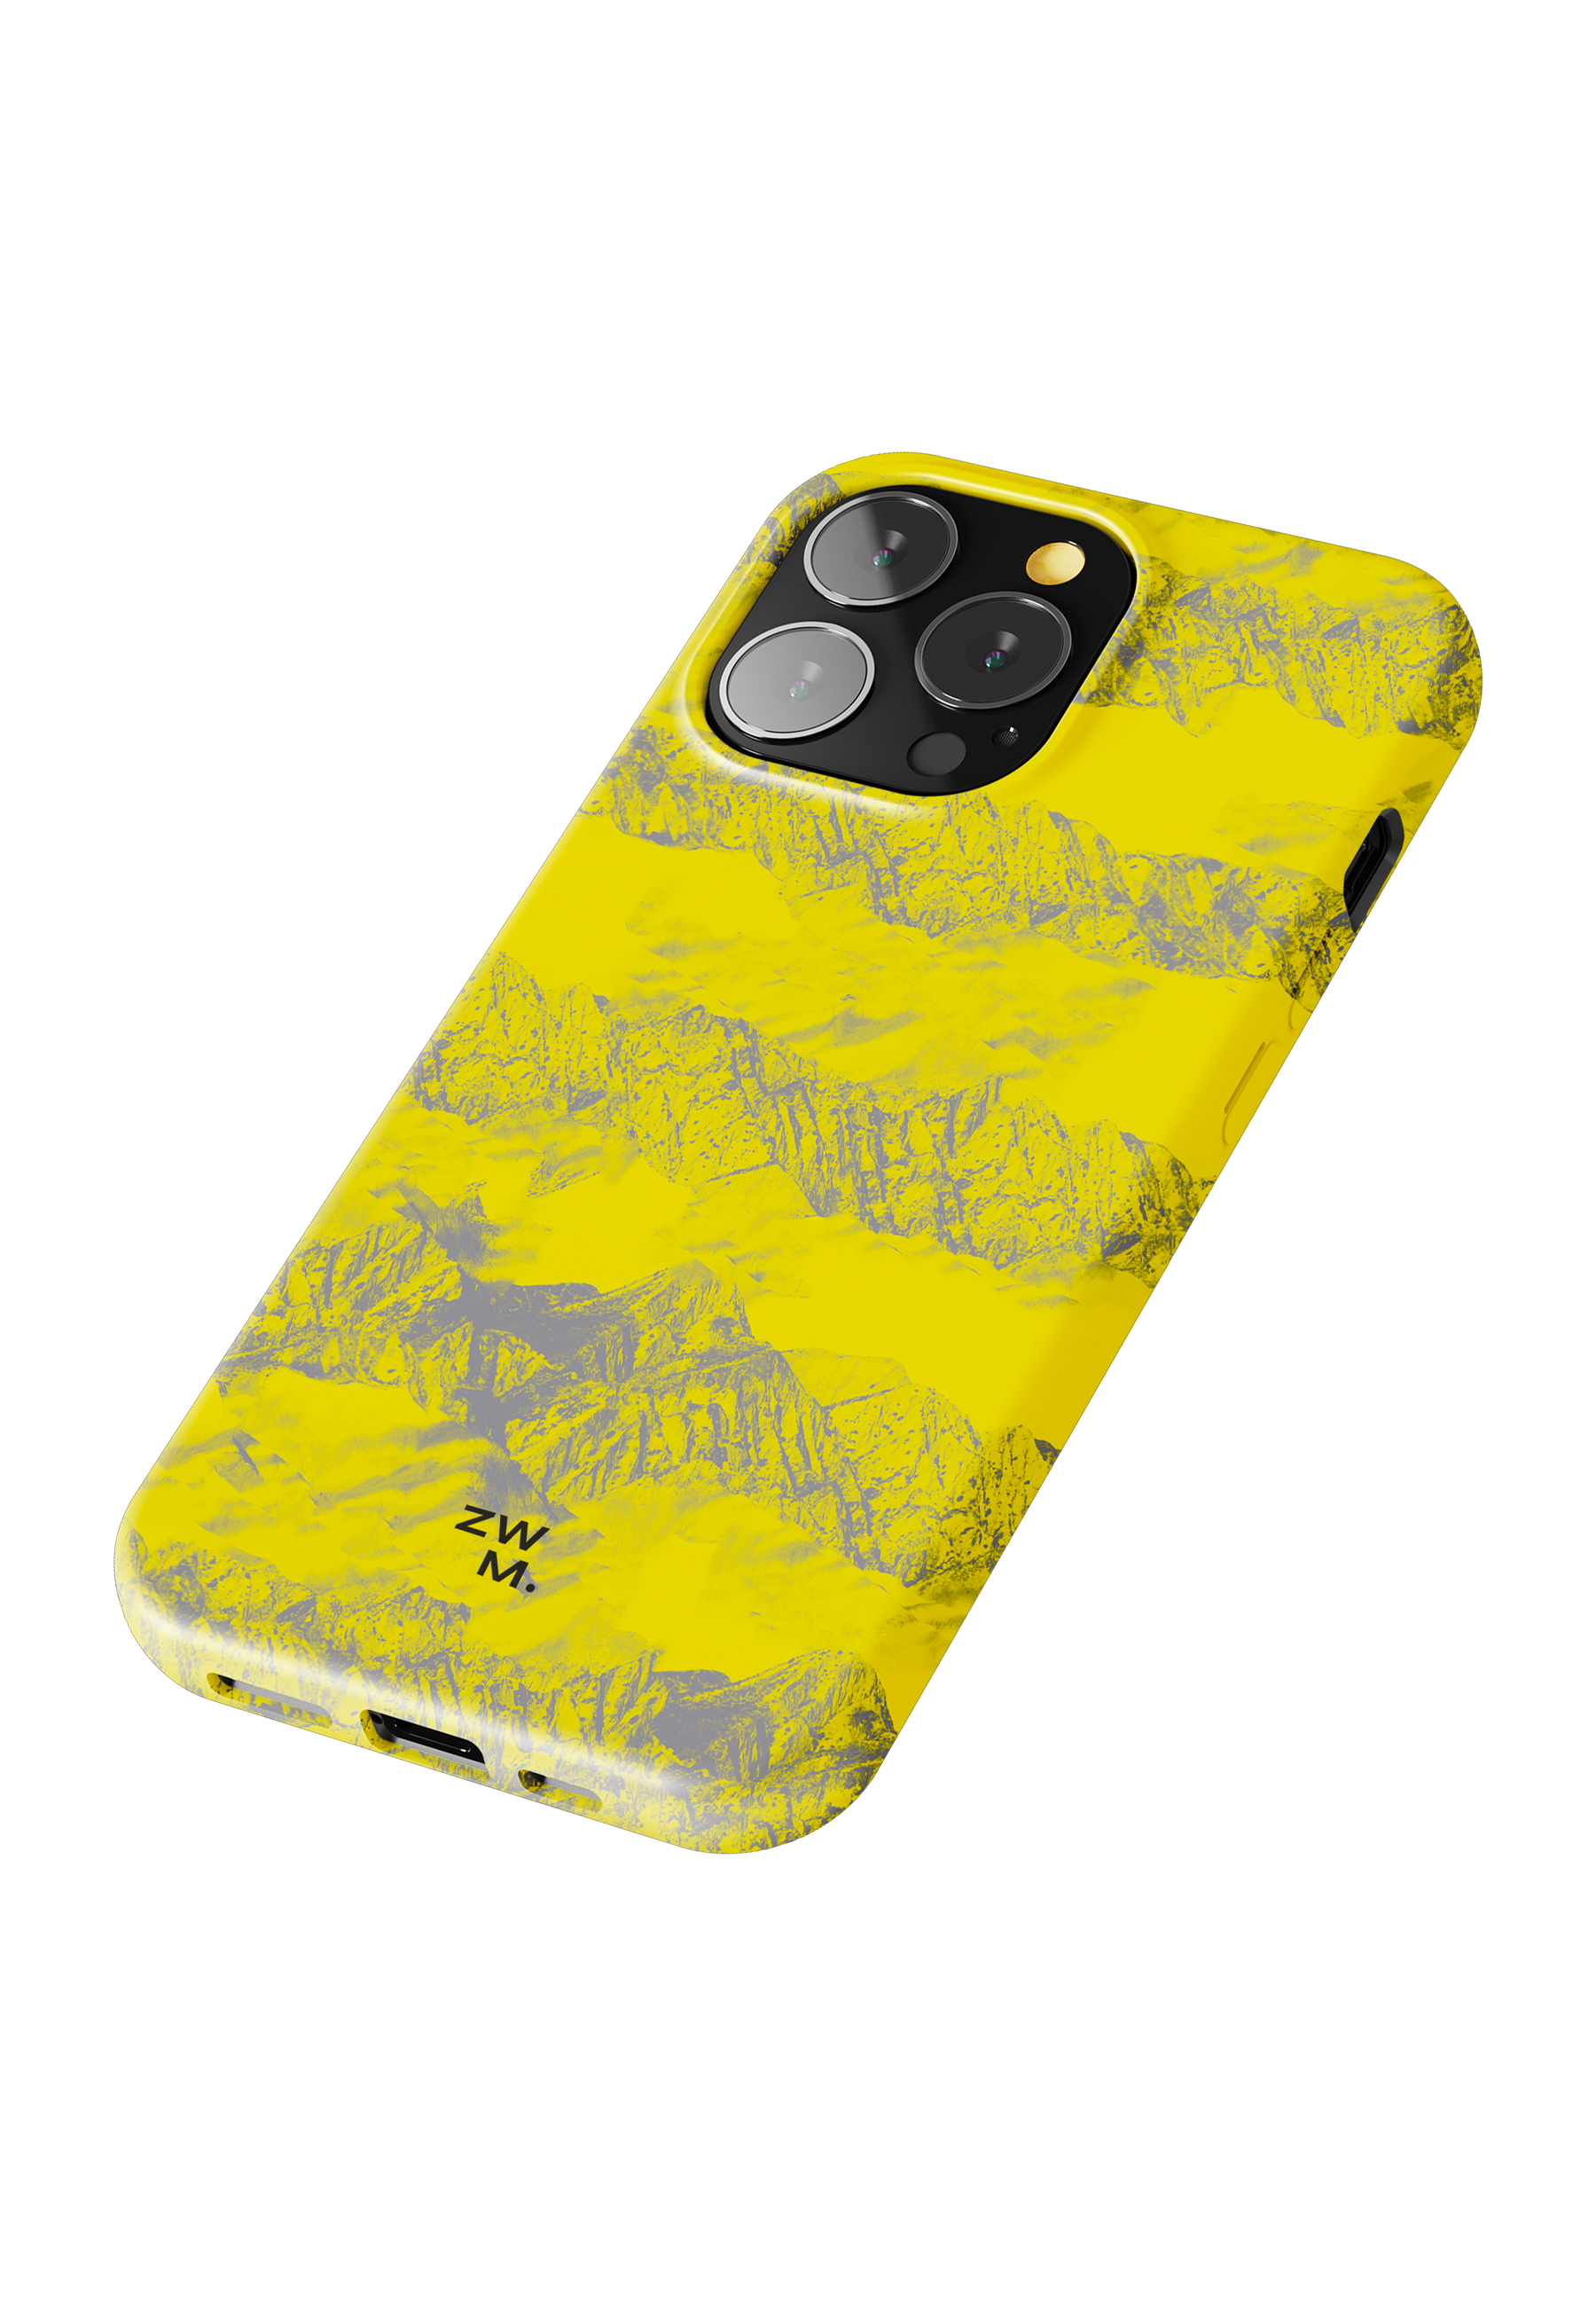 _13PM, iPhone yellow/black 12/12 Backcover, Apple, Pro, ZWM